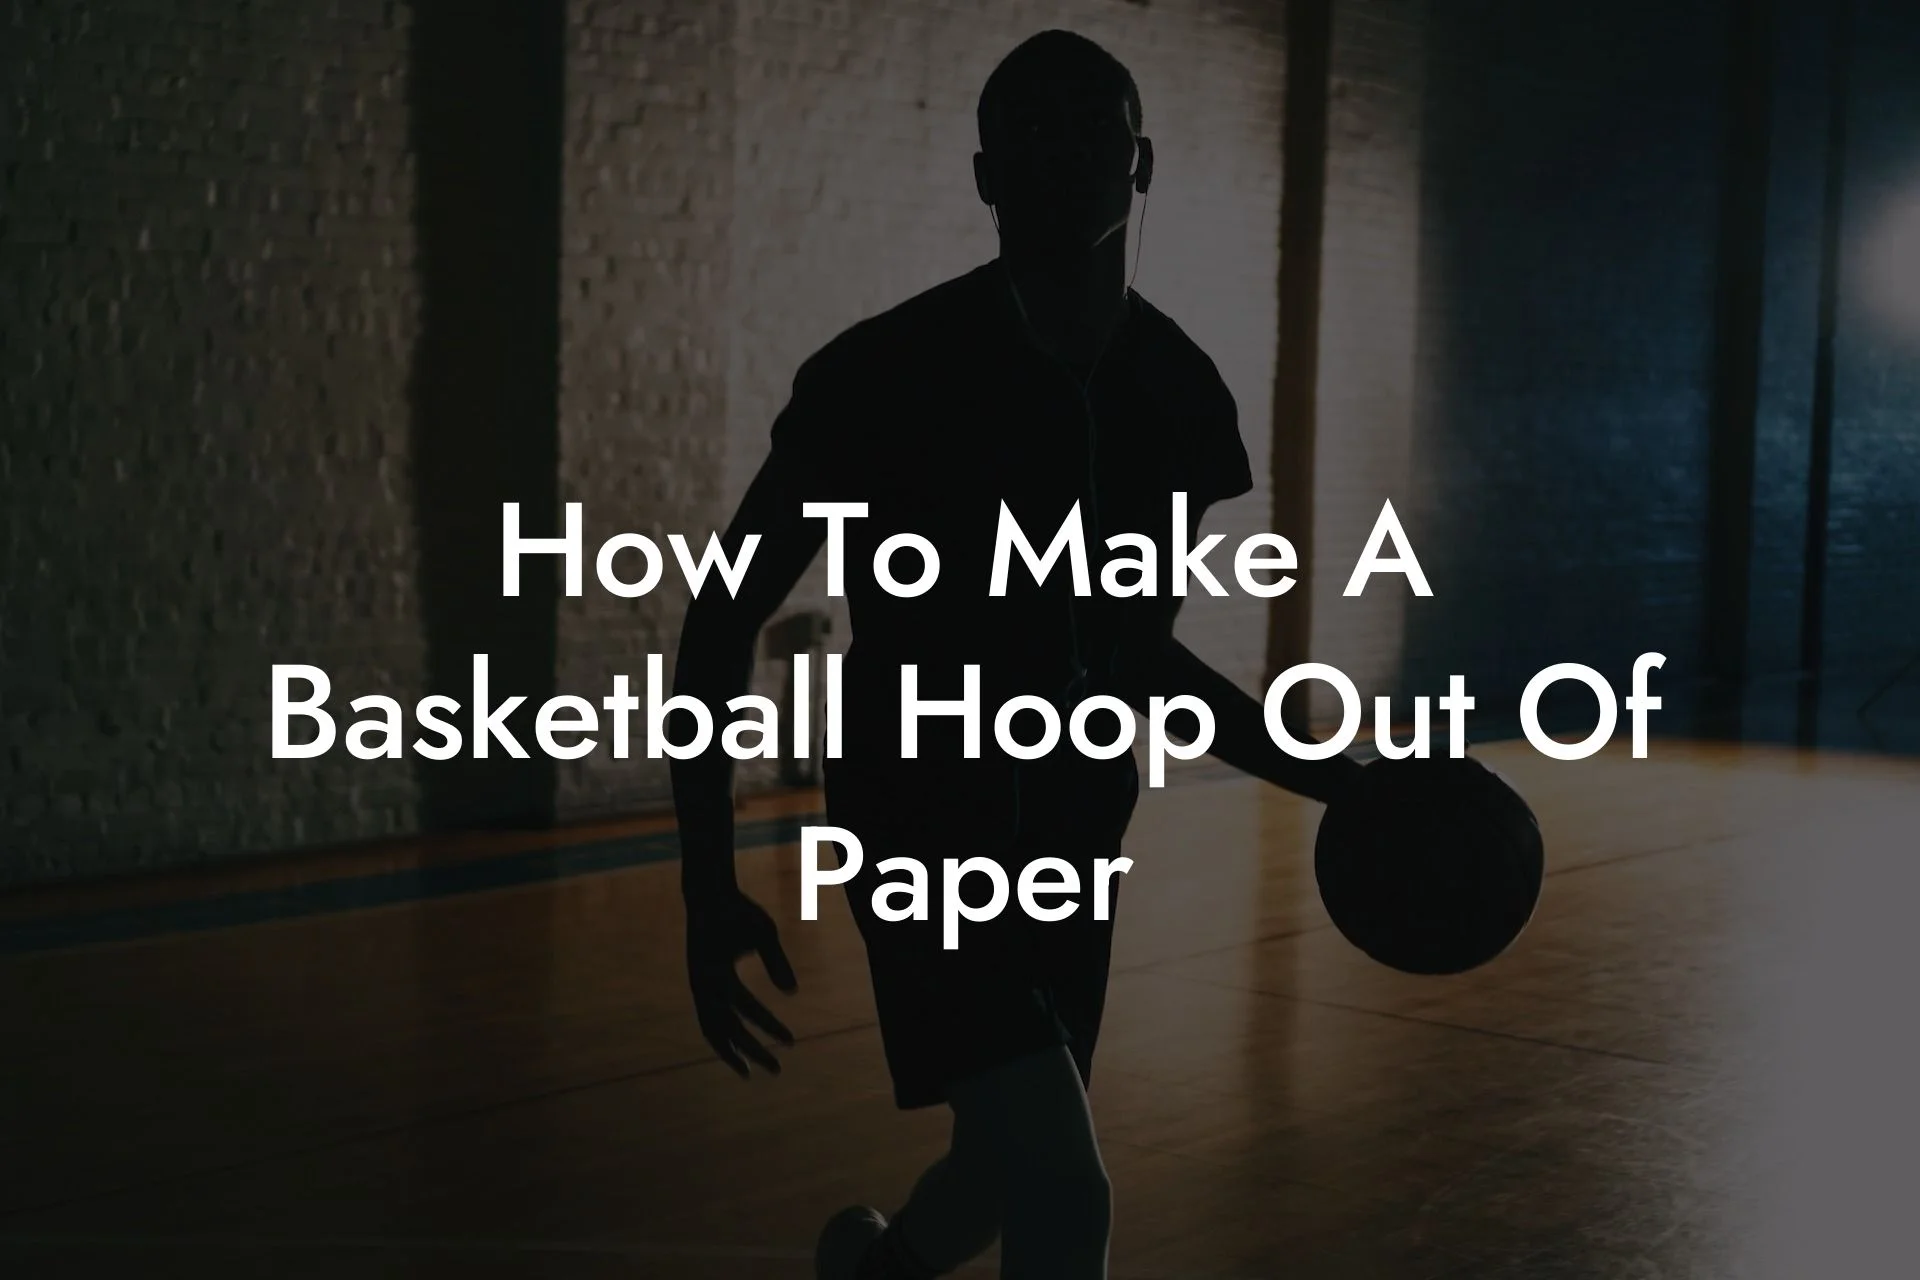 How To Make A Basketball Hoop Out Of Paper